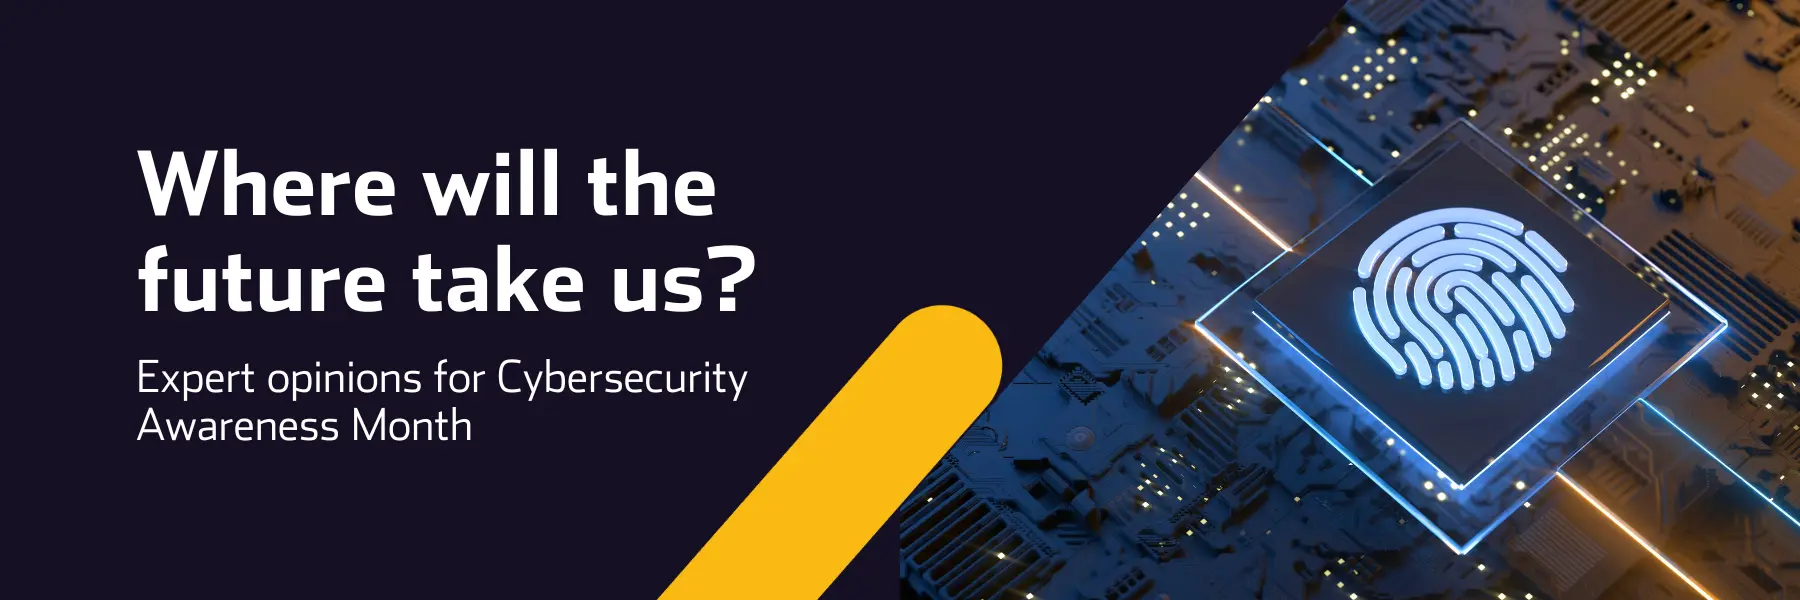 Cybersecurity - where will the future take us?